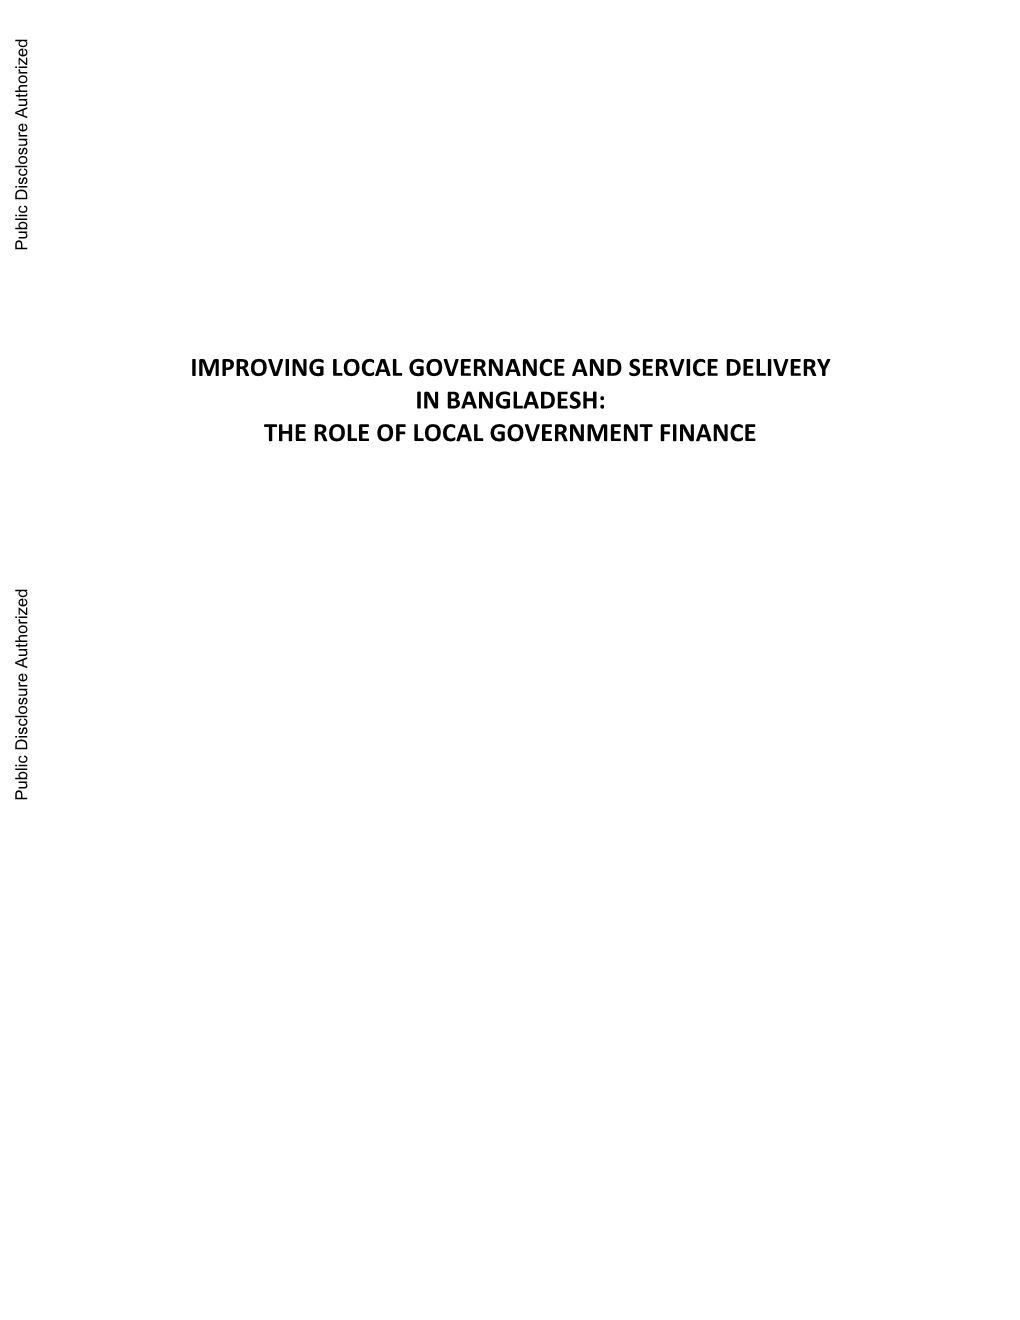 The Role of Local Government Finance